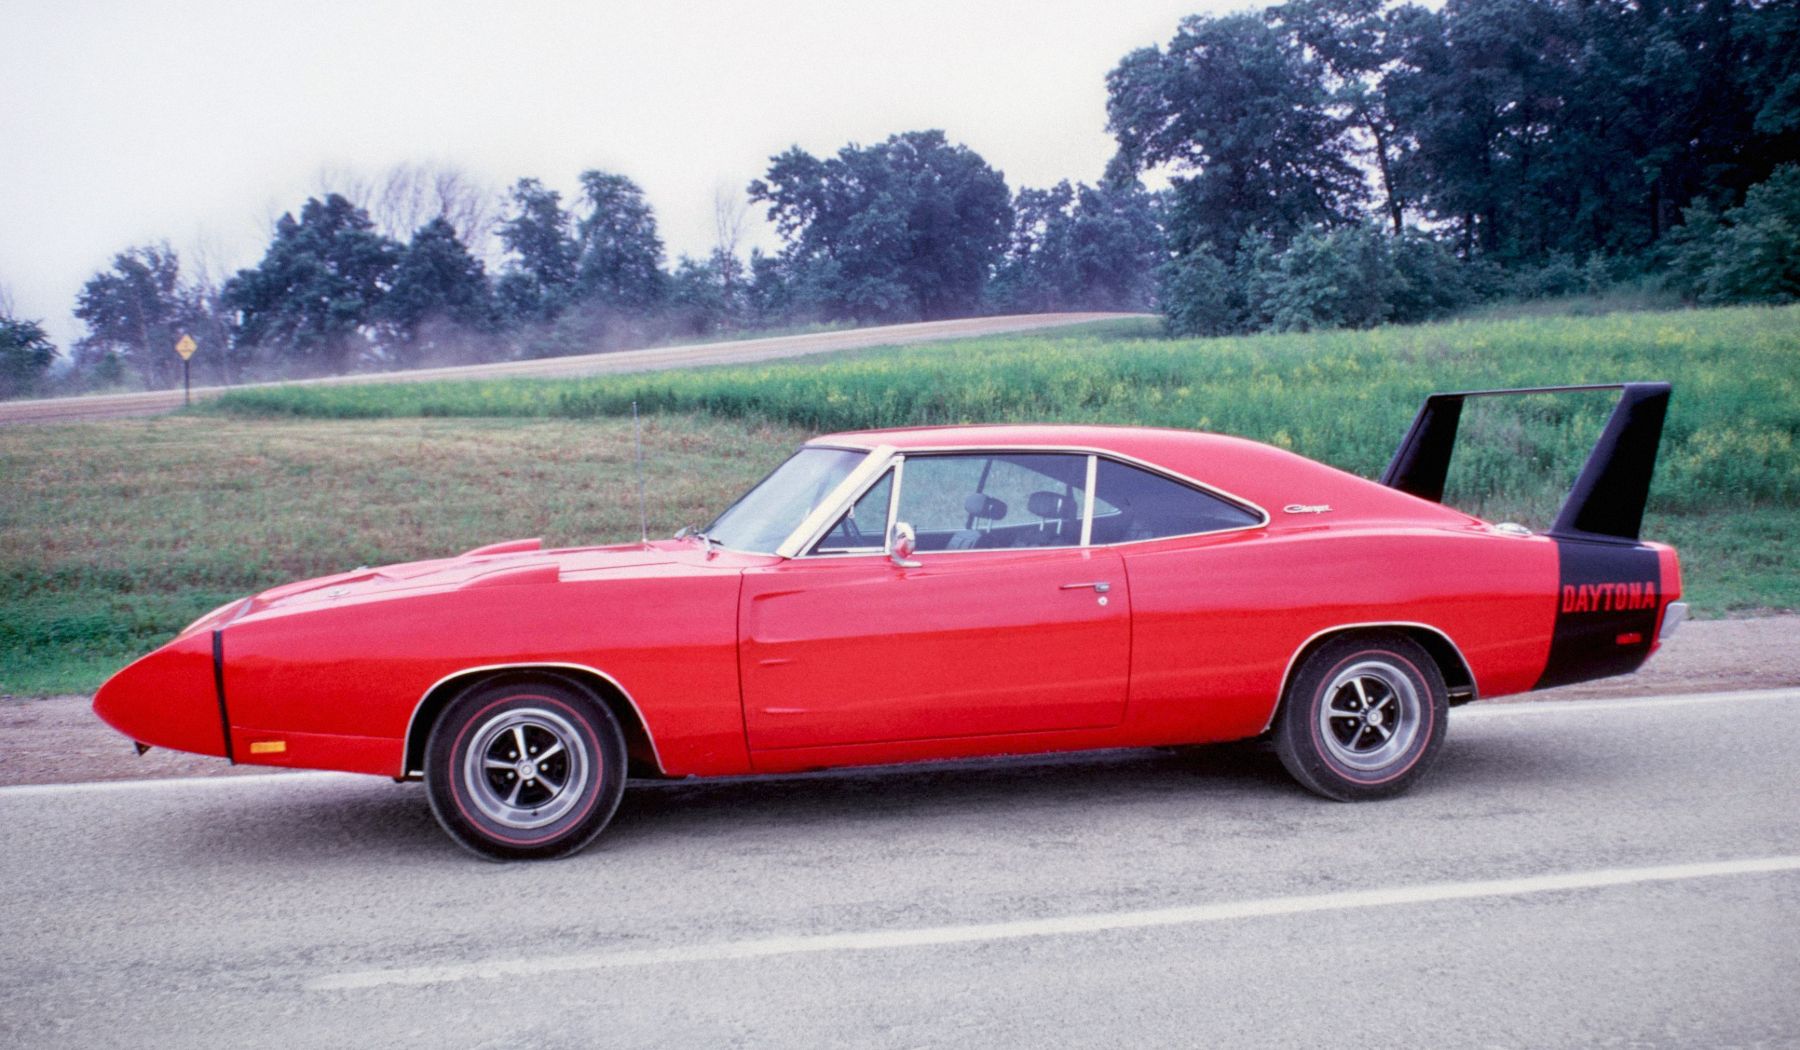 1969 Dodge Charger Daytona vs. 1970 Plymouth Superbird: How to Tell Them Ap...